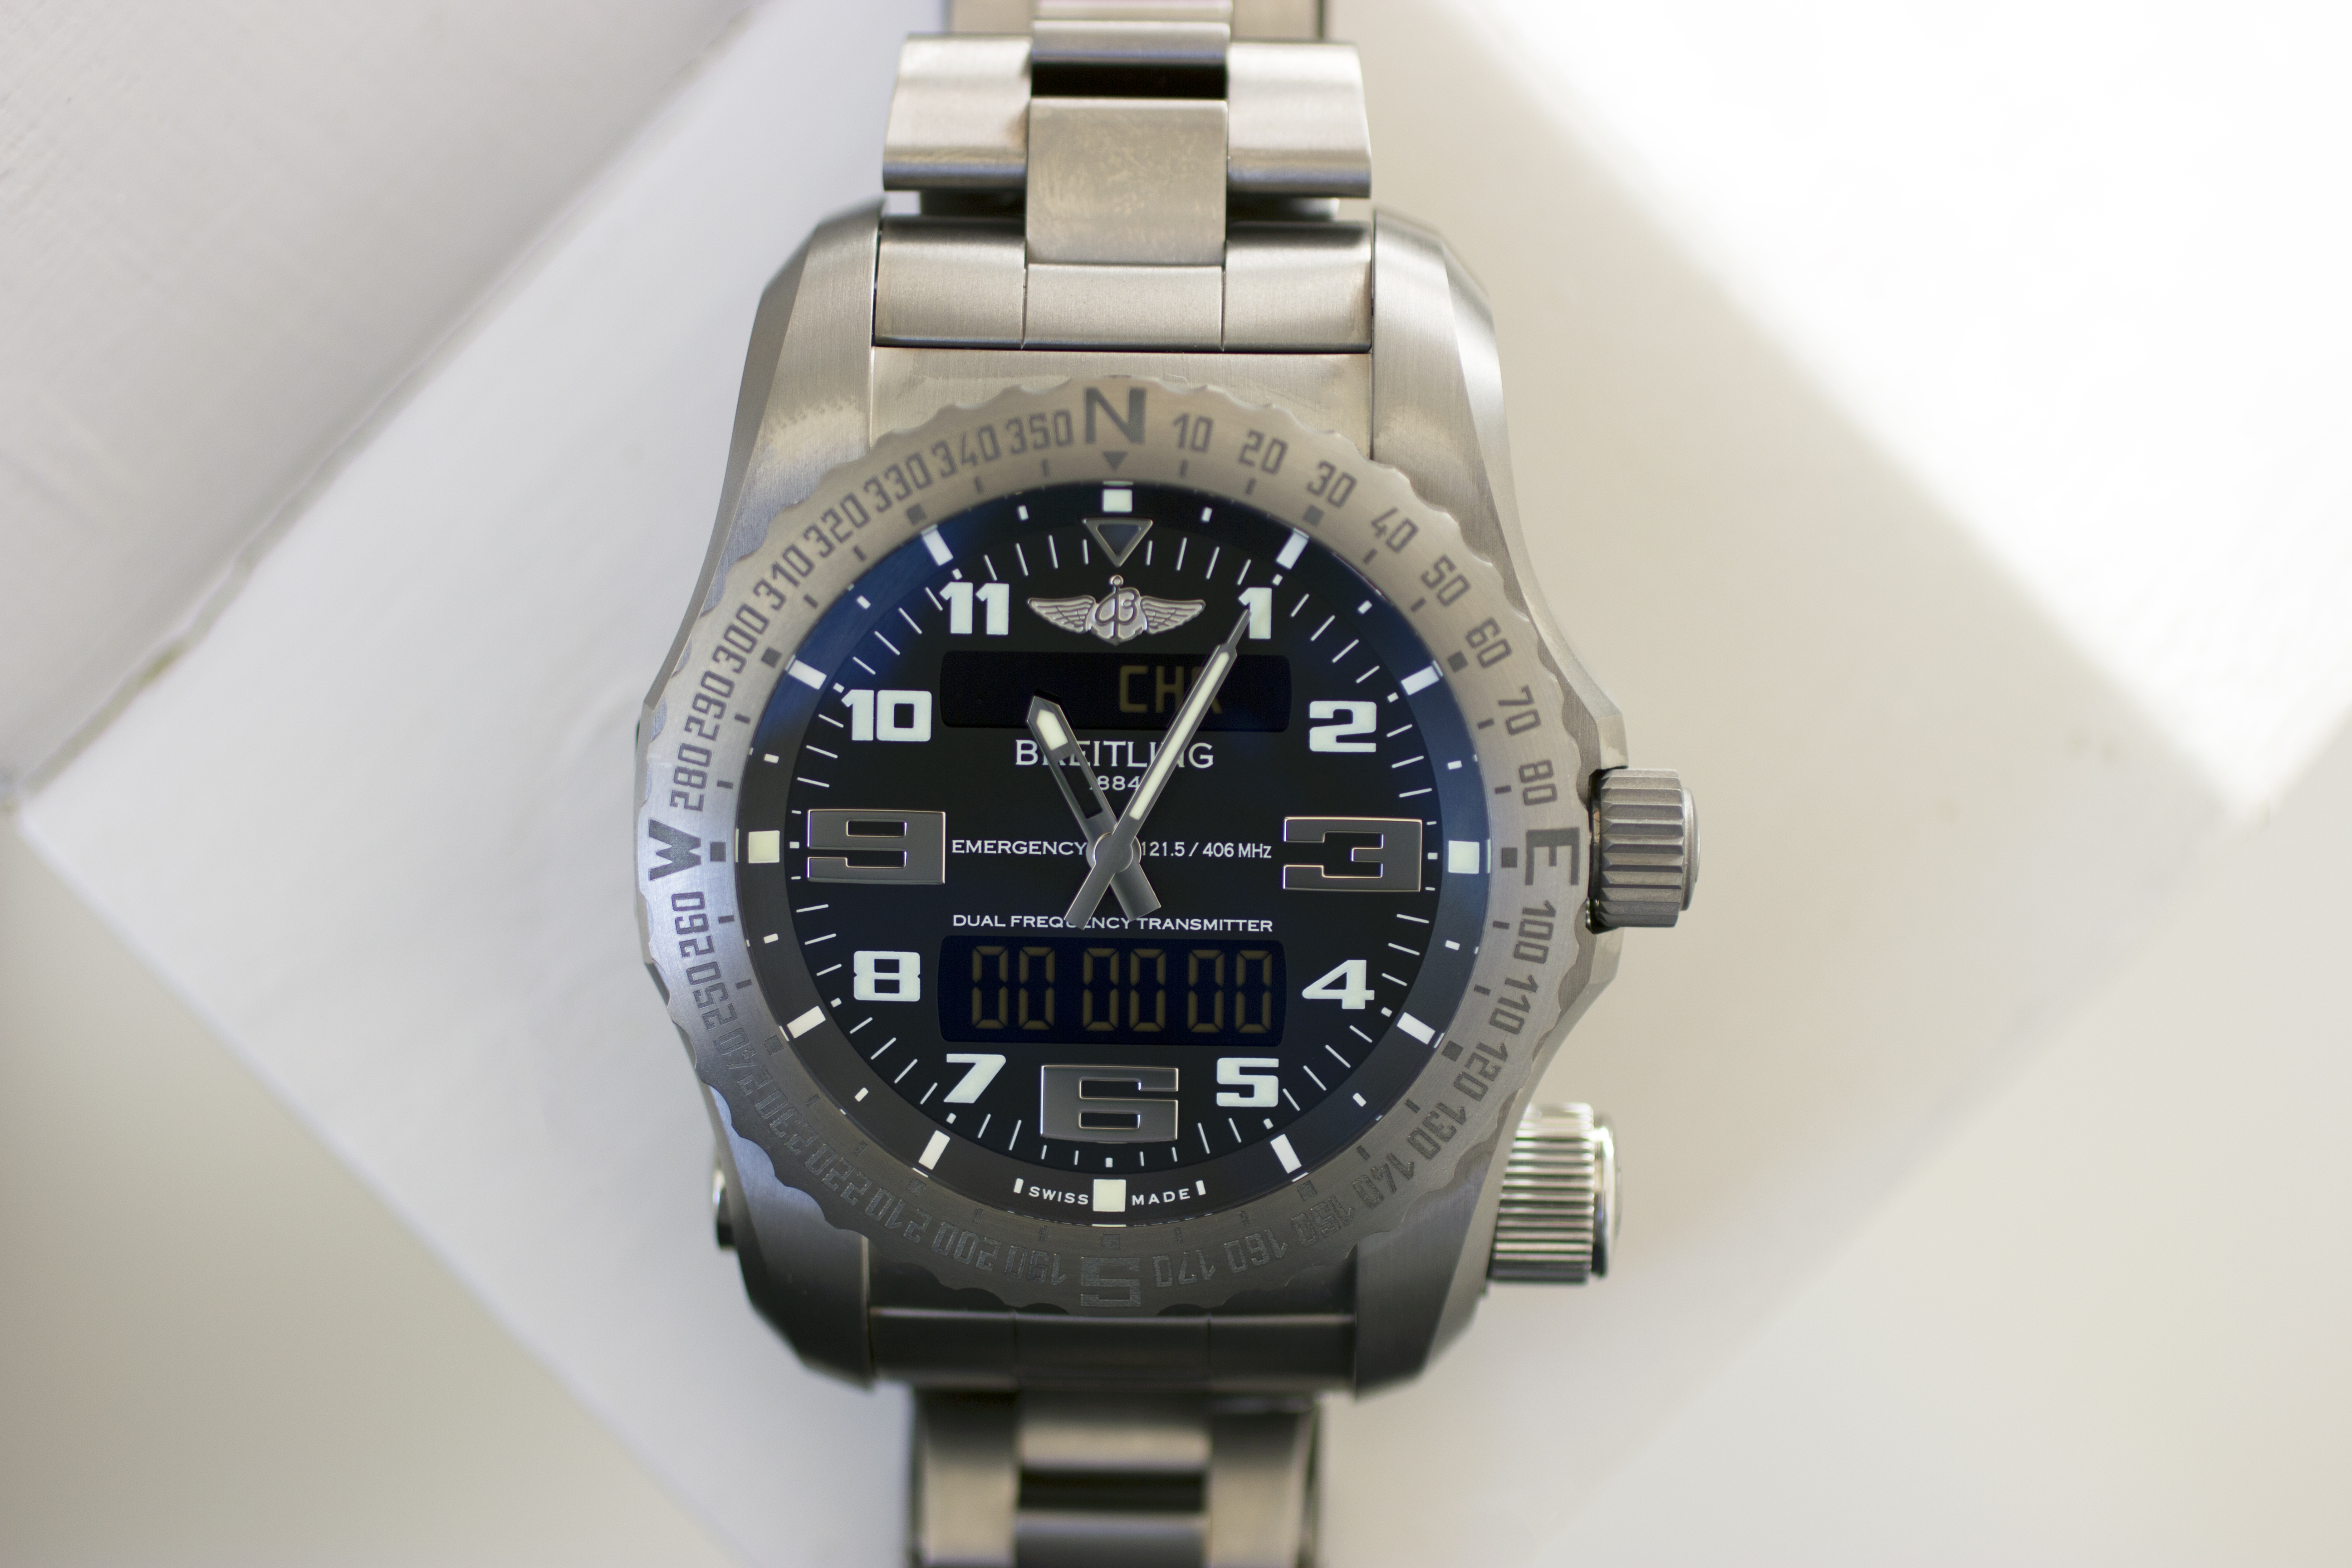 Breitling Emergency II Watch Review | Page 2 of 2 | aBlogtoWatch